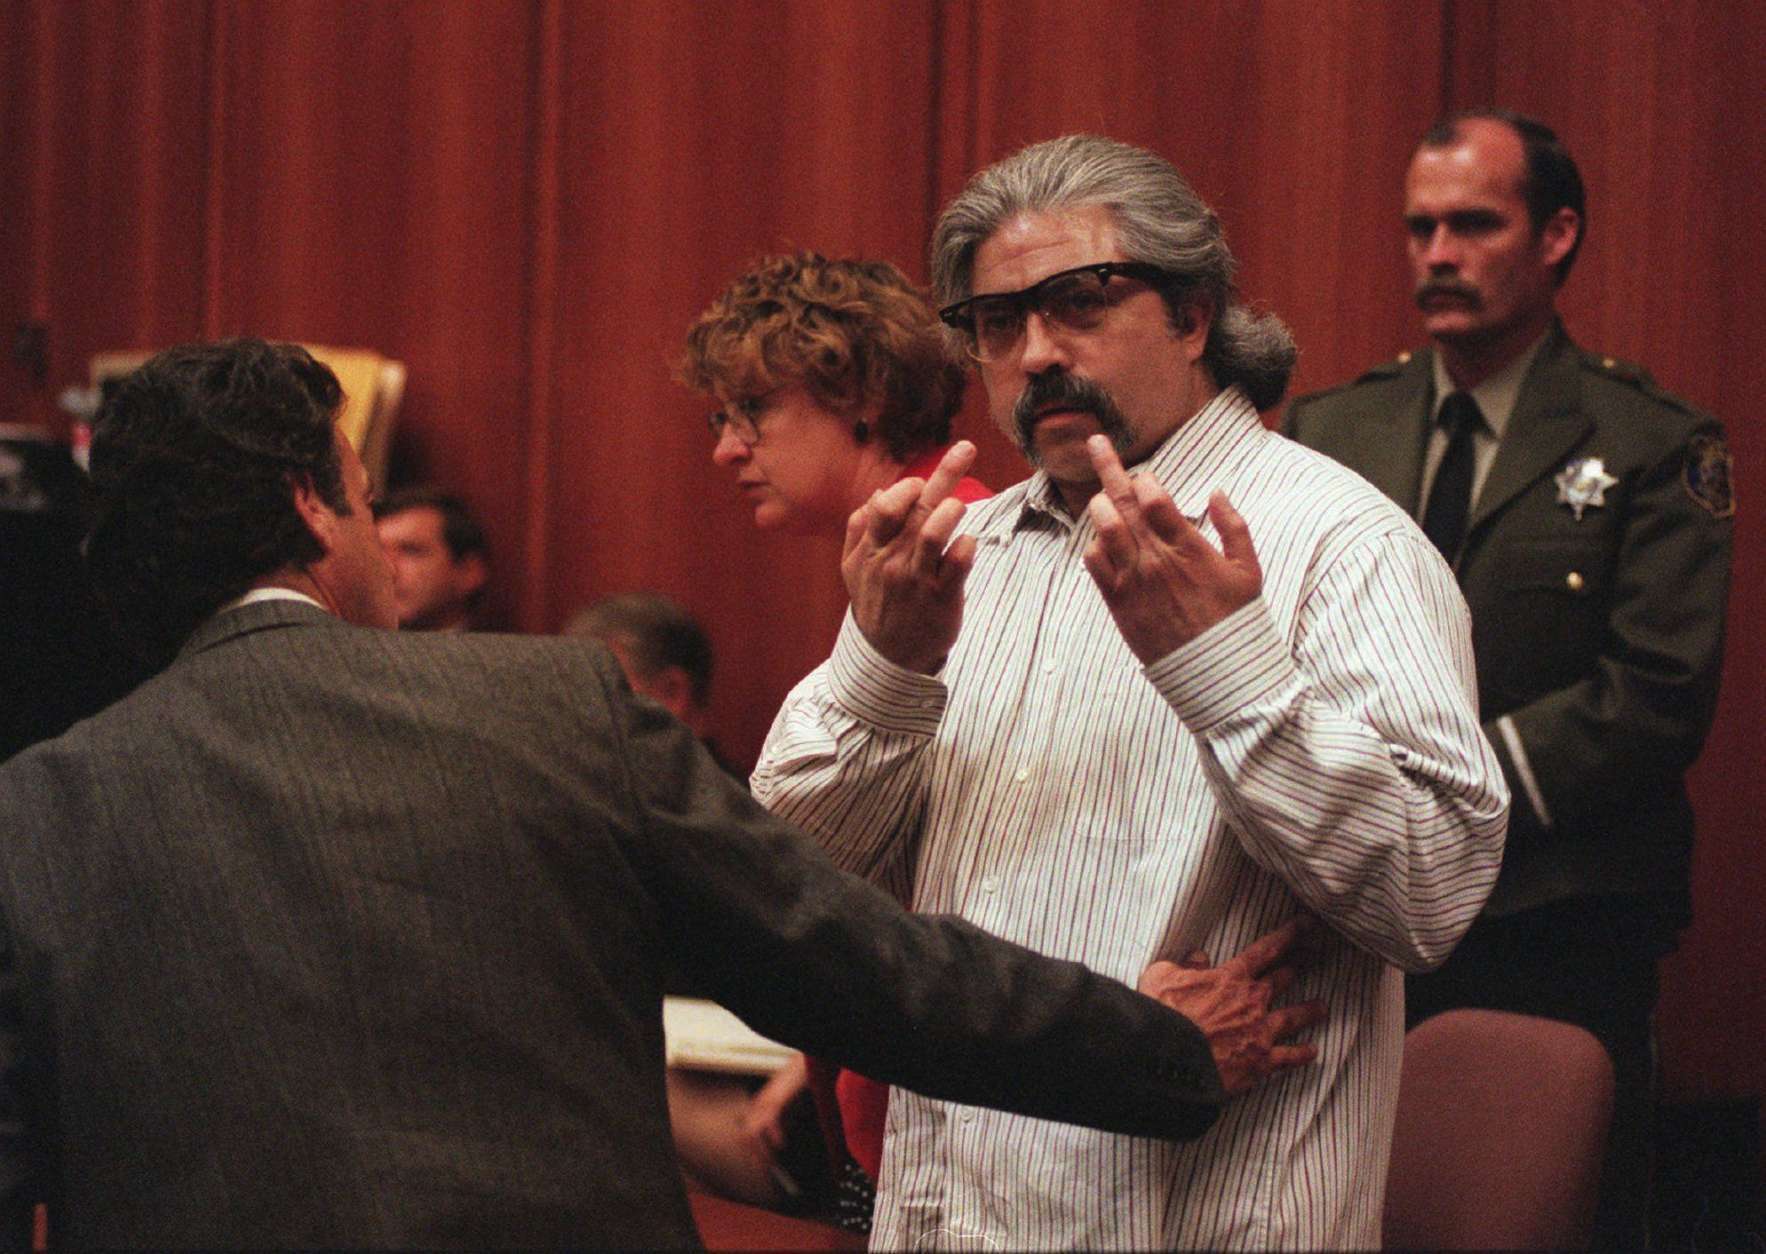 Richard Allen Davis, found guilty of the murder of Polly Klaas in San Jose on Tuesday, June 18, 1996, gestures toward the television camera after the verdict.  He is restrained by his lawyer defense counsel Barry Collins.  Behind is his other attorney Lorena Chandler. (AP Photo/John Burgess)